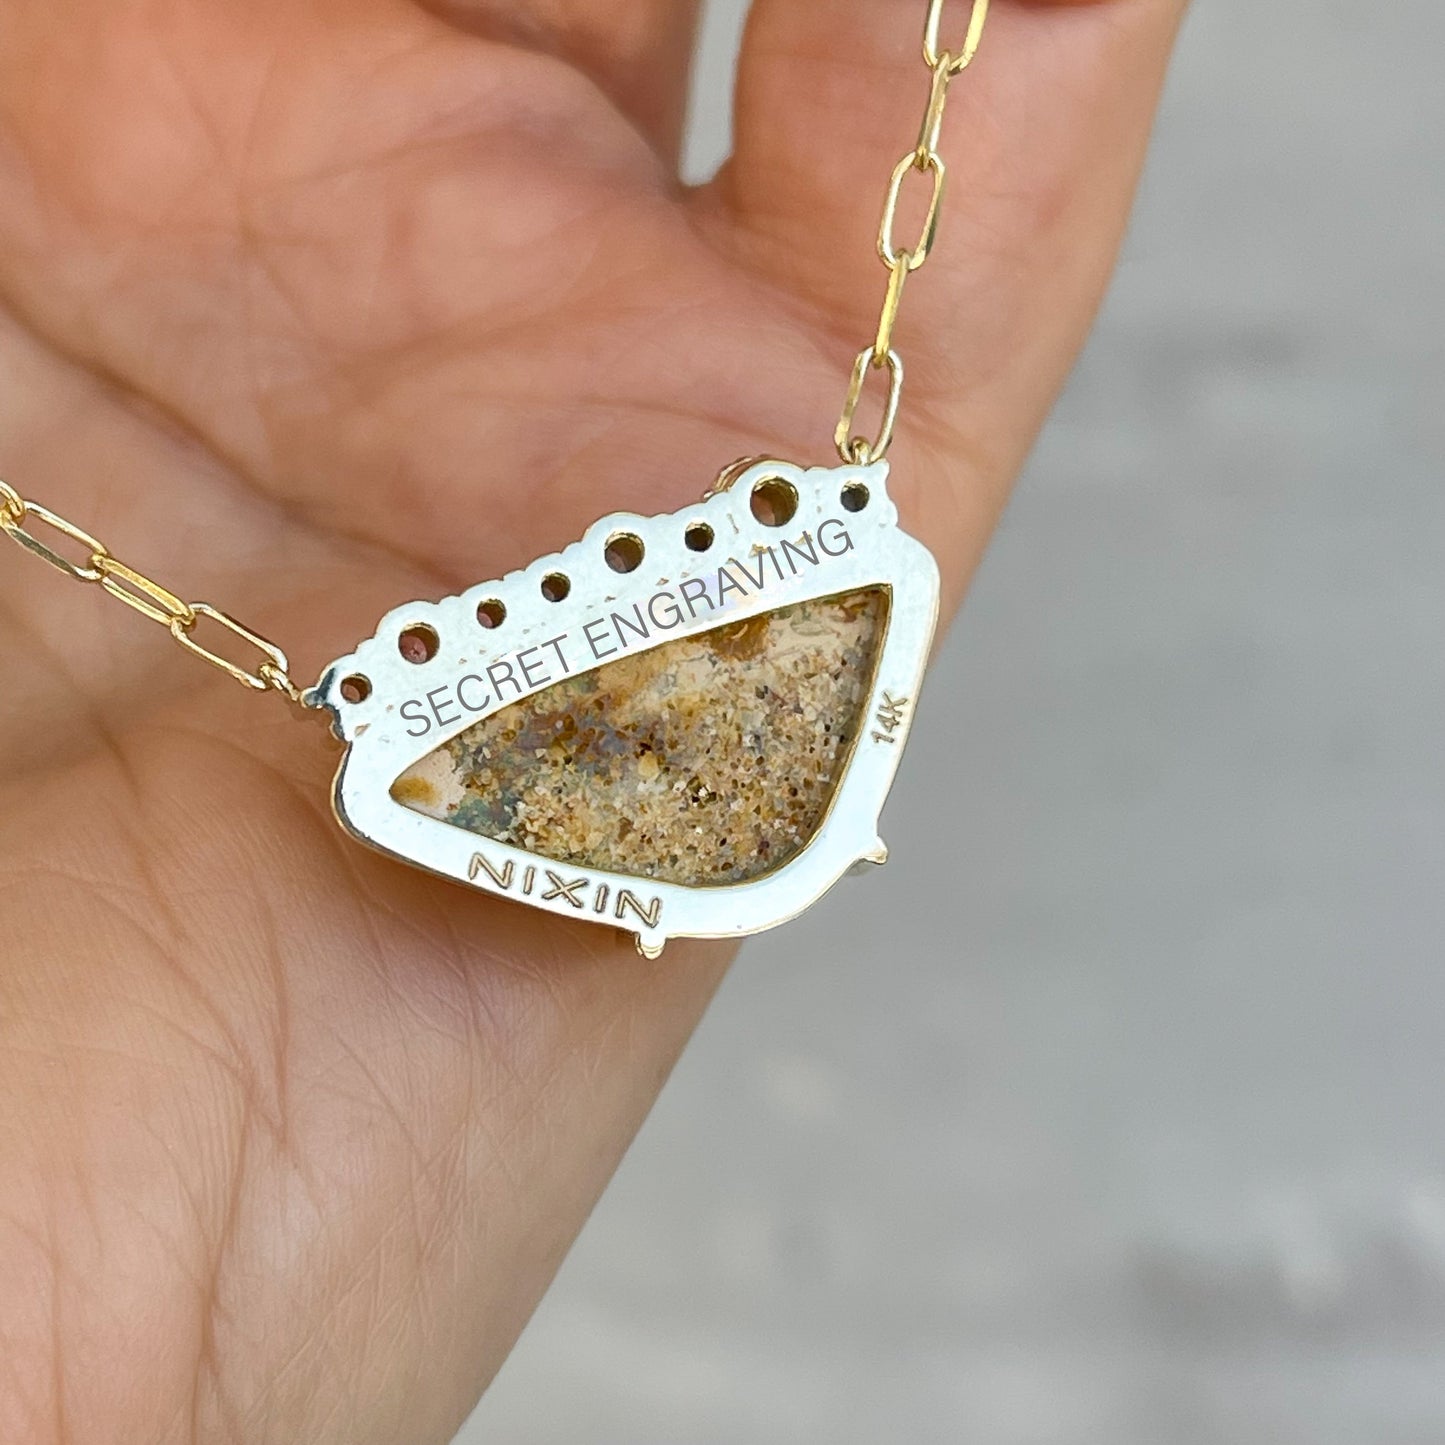 An Australian Opal Necklace by NIXIN Jewelry with a secret engraving on the back. This photo of the opal pendant resting on the hand shows where the secret inscription is.